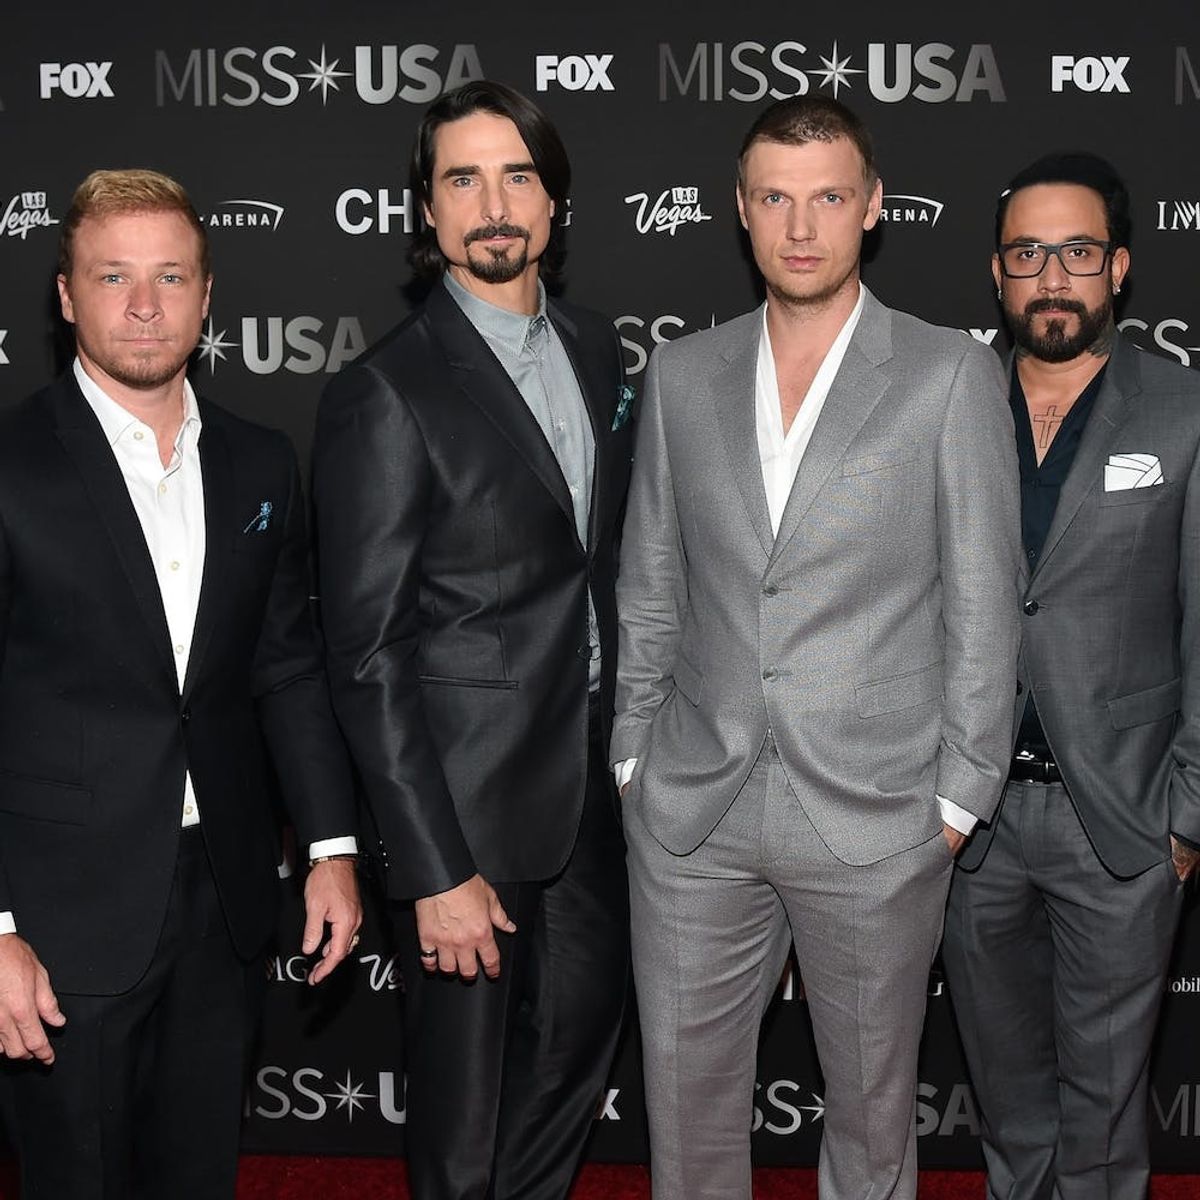 The Next Season of the Bachelor Will Include an Epic Backstreet Boys Appearance